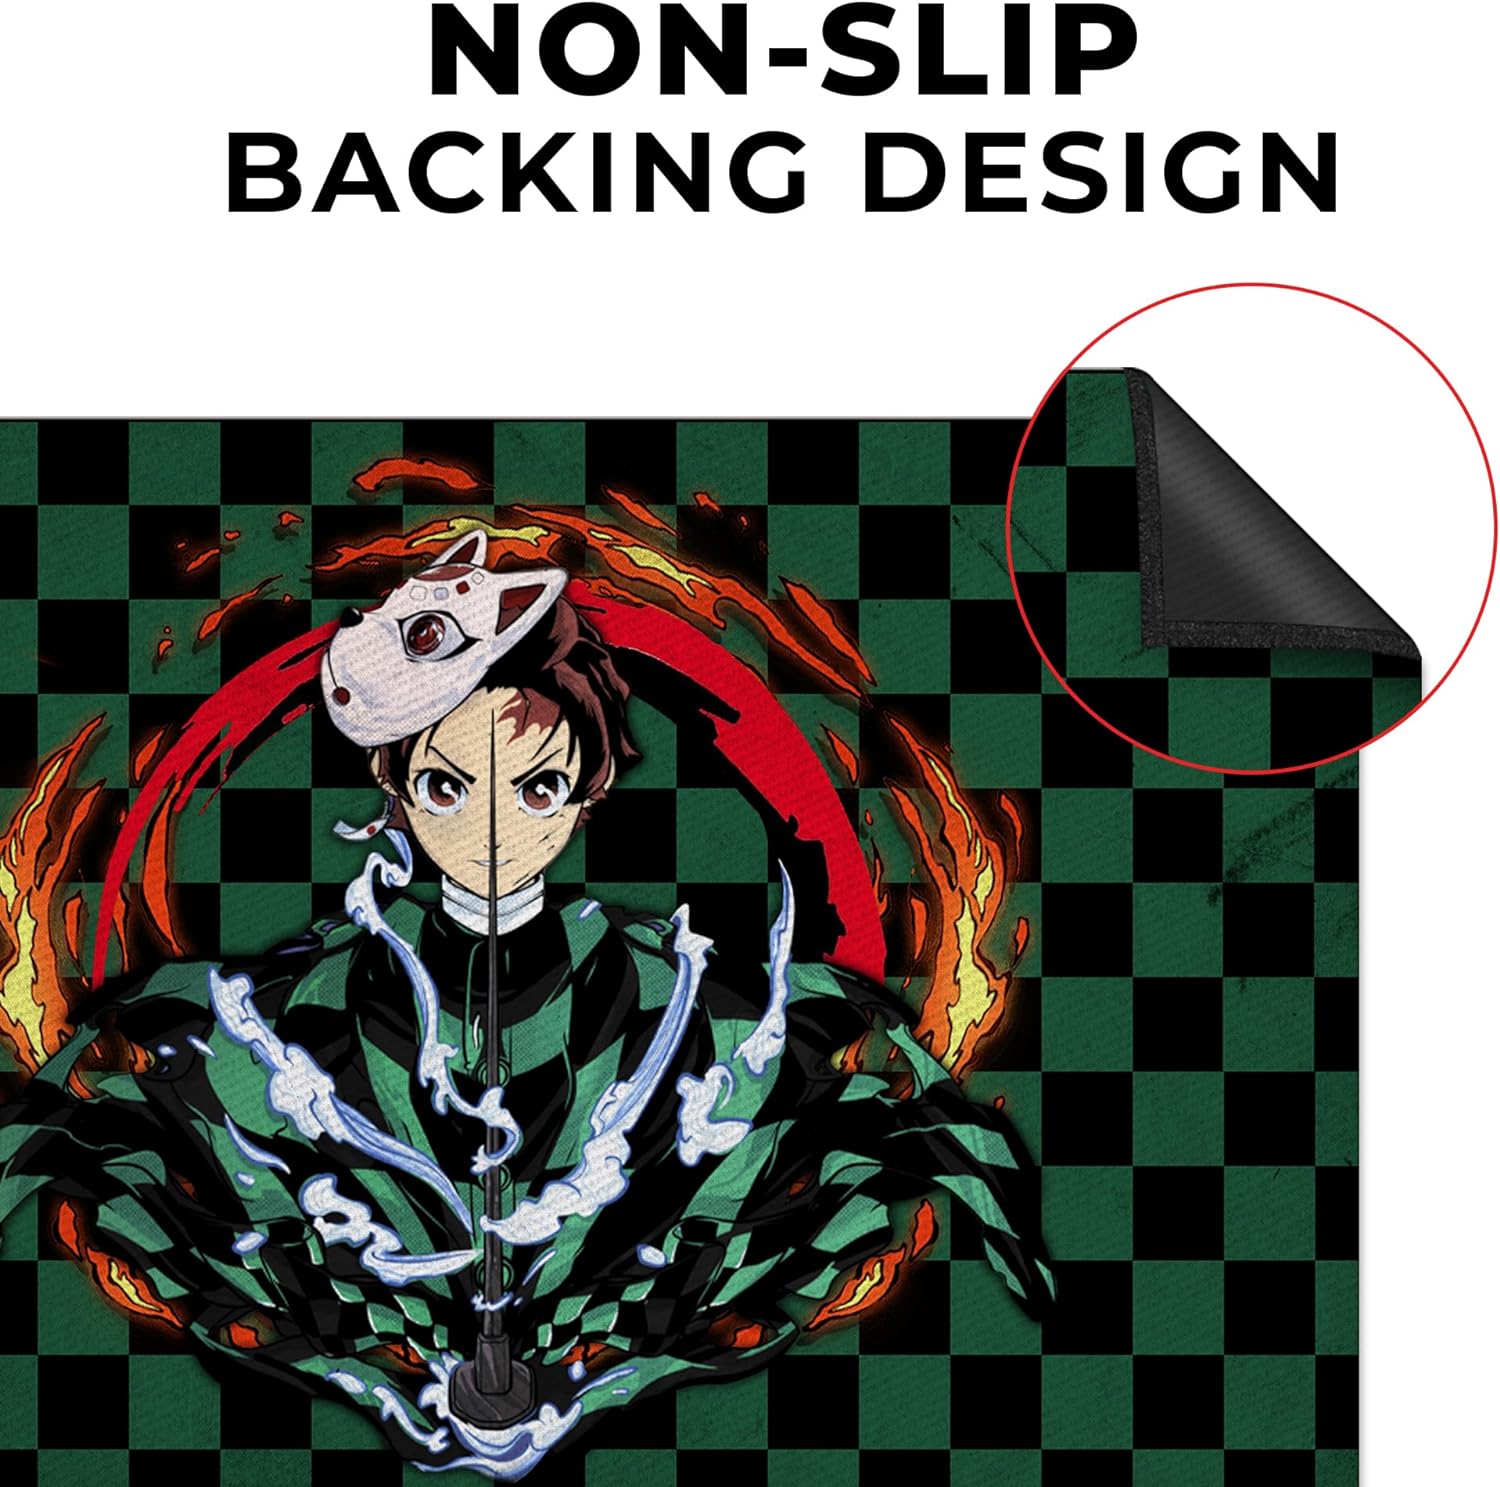 Anime Inspired Gaming Rug - 62x40 inches, Gamer Room Decor, Non-slip backing, Premium quality